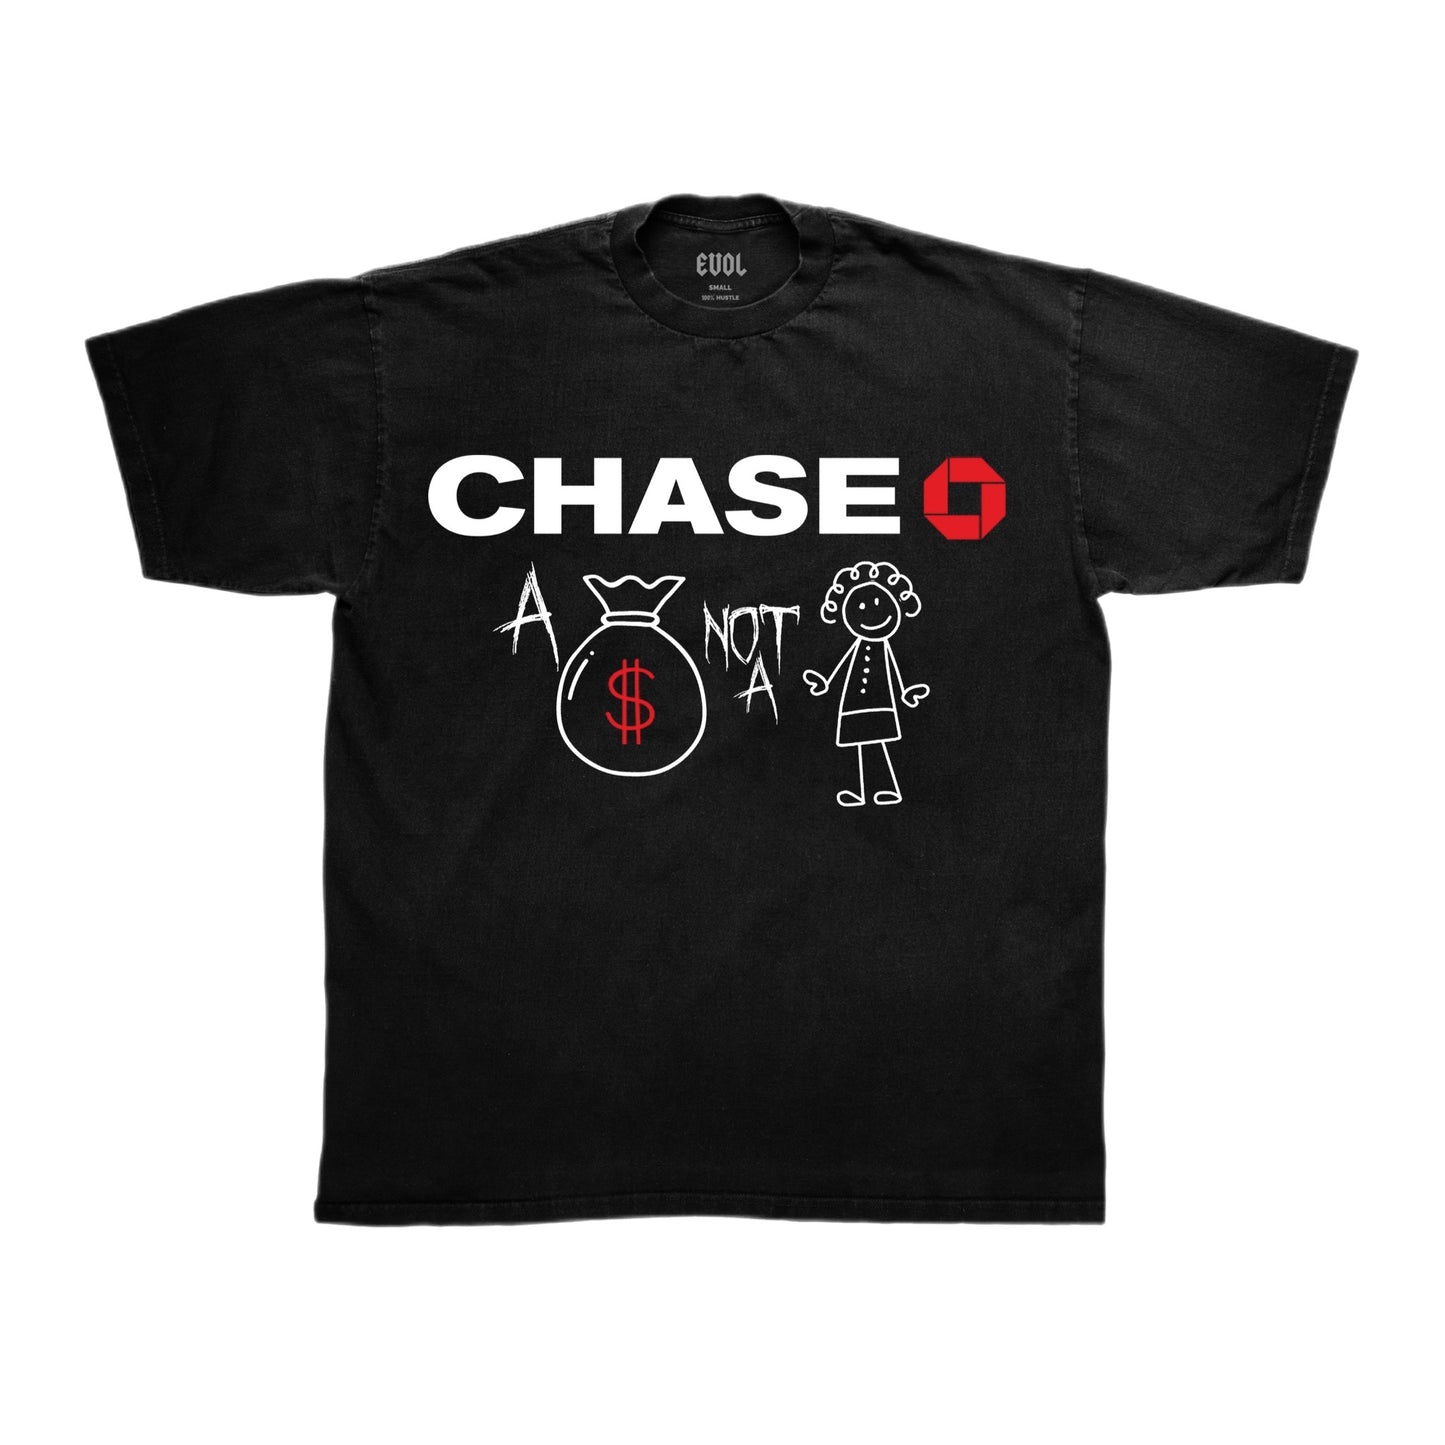 EVOL Chase Tee Black/Red